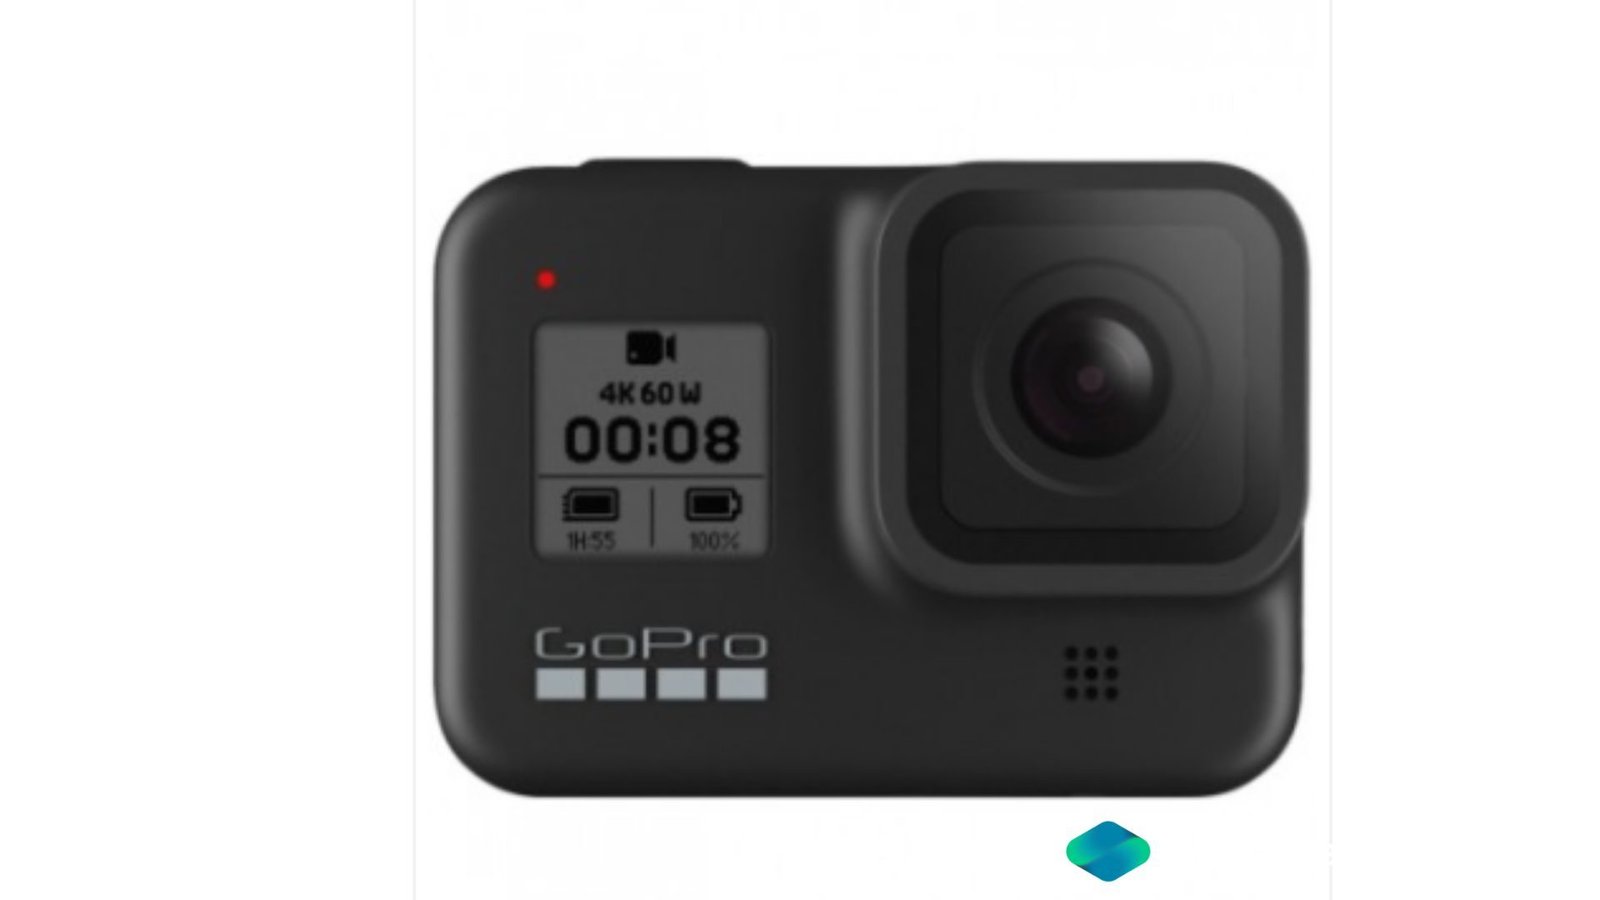 Rent GoPro Hero 8 Camera With All Accessories in Delhi NCR, Camera accessories, Camera lenses for rent, in Delhi Gurgaon Noida, hire Shooting equipment, Lighting equipment rental, Film gear rental for Video production, camera rental company in Delhi, film equipment rental company